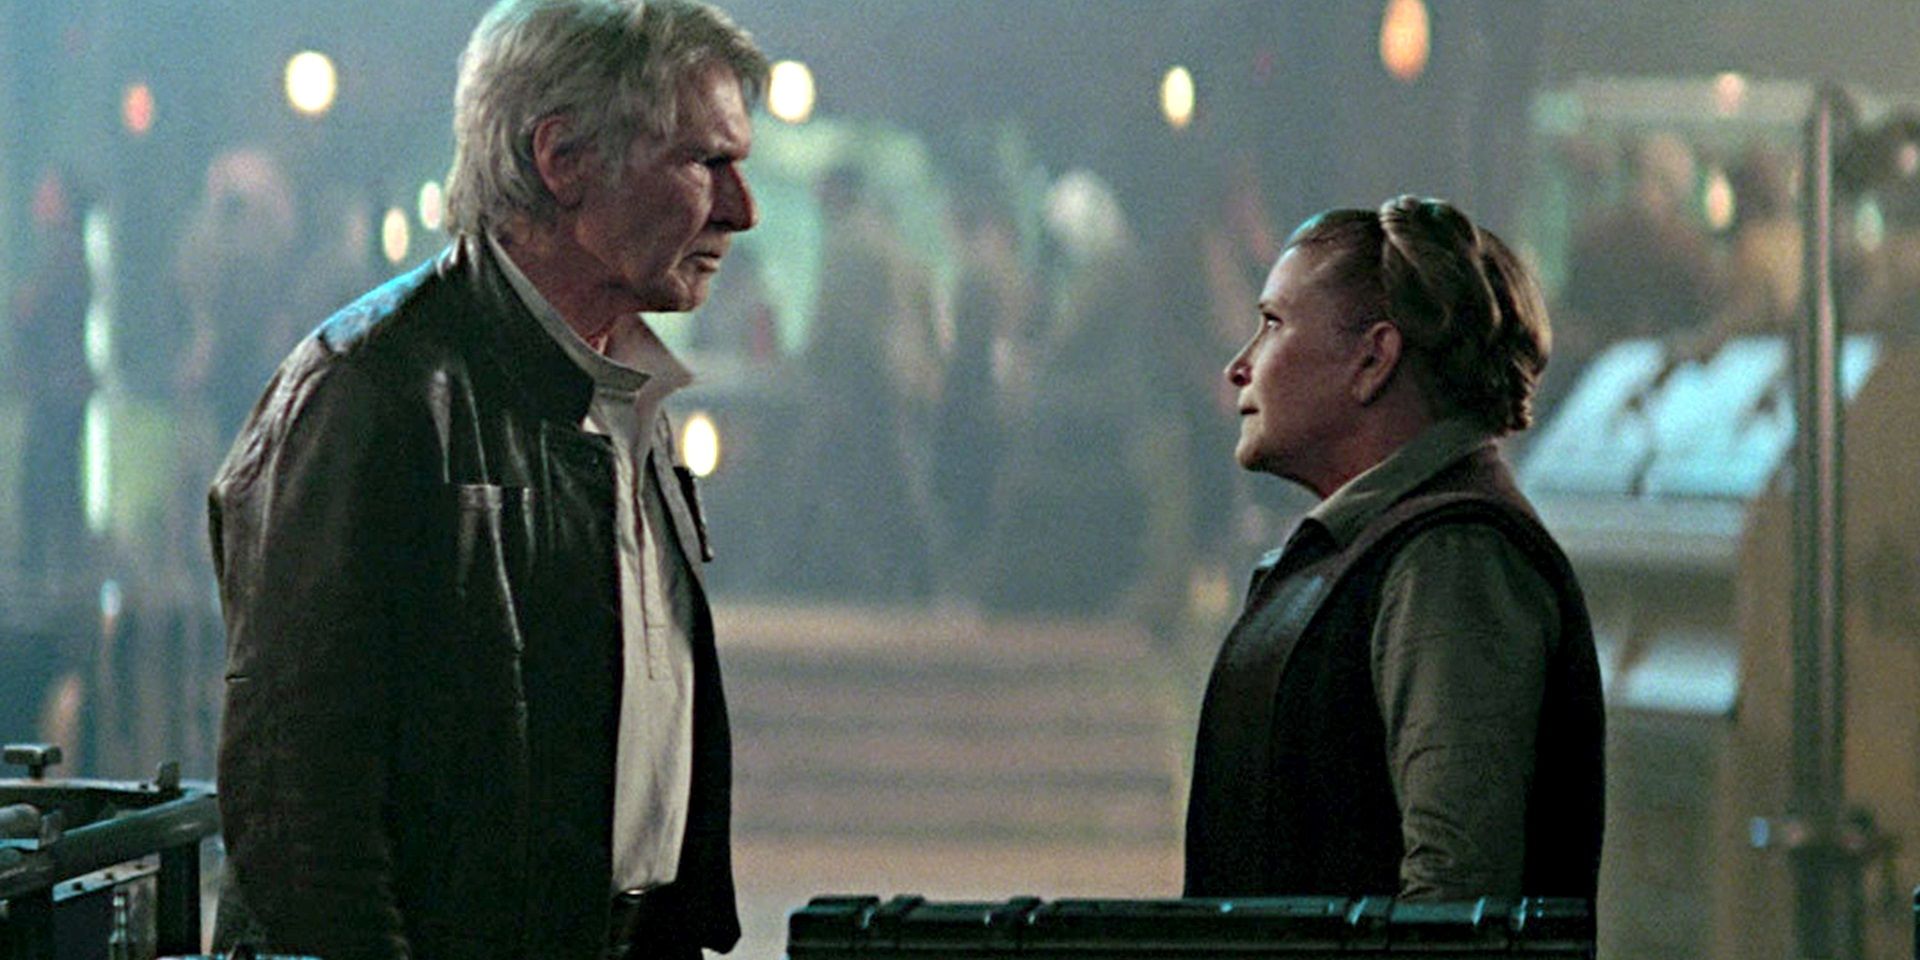 Leia and Han at a Resistance base in The Force Awakens